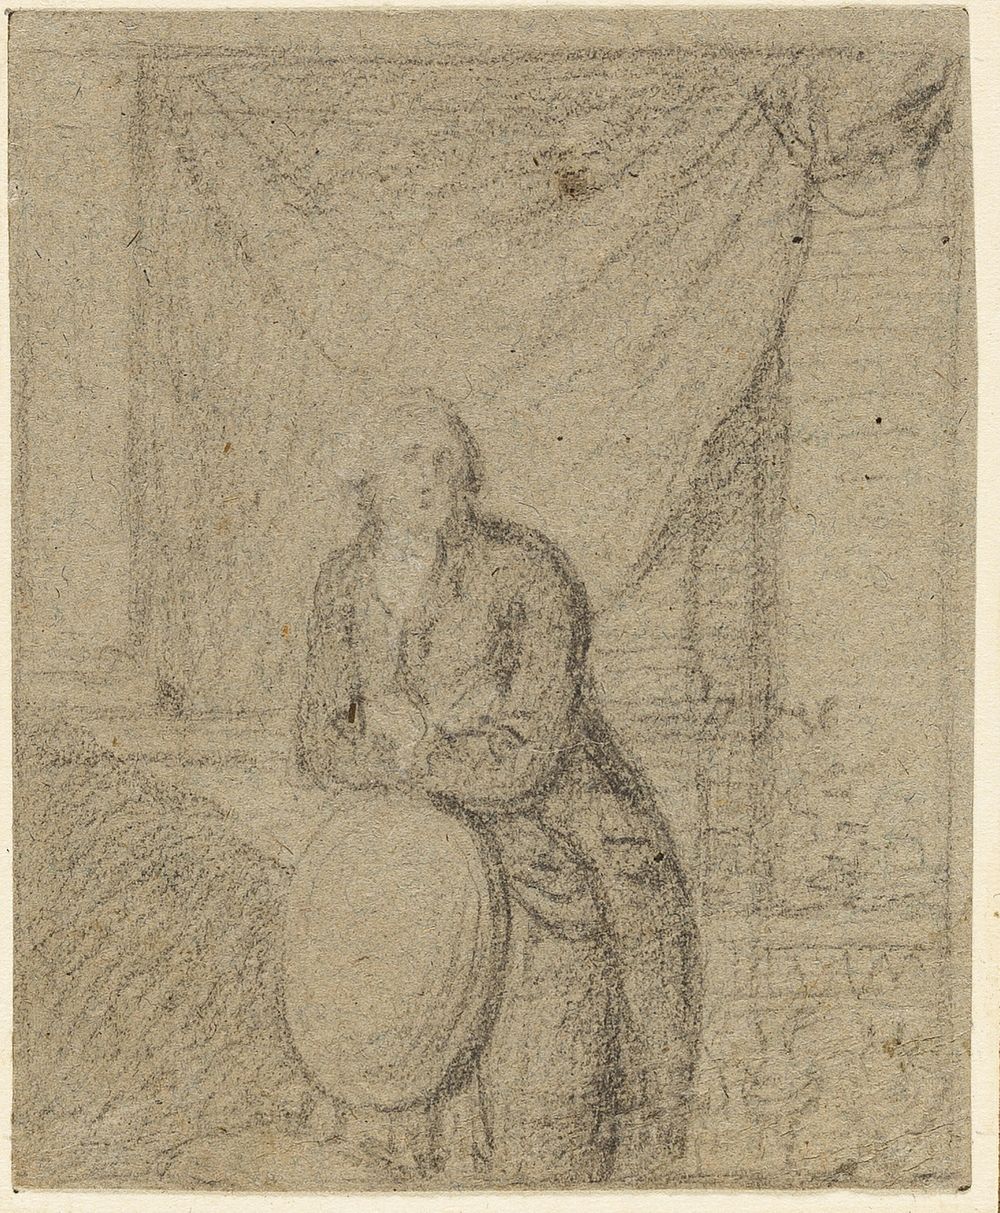 Portrait of a Man Standing in Front of Window by Benjamin West